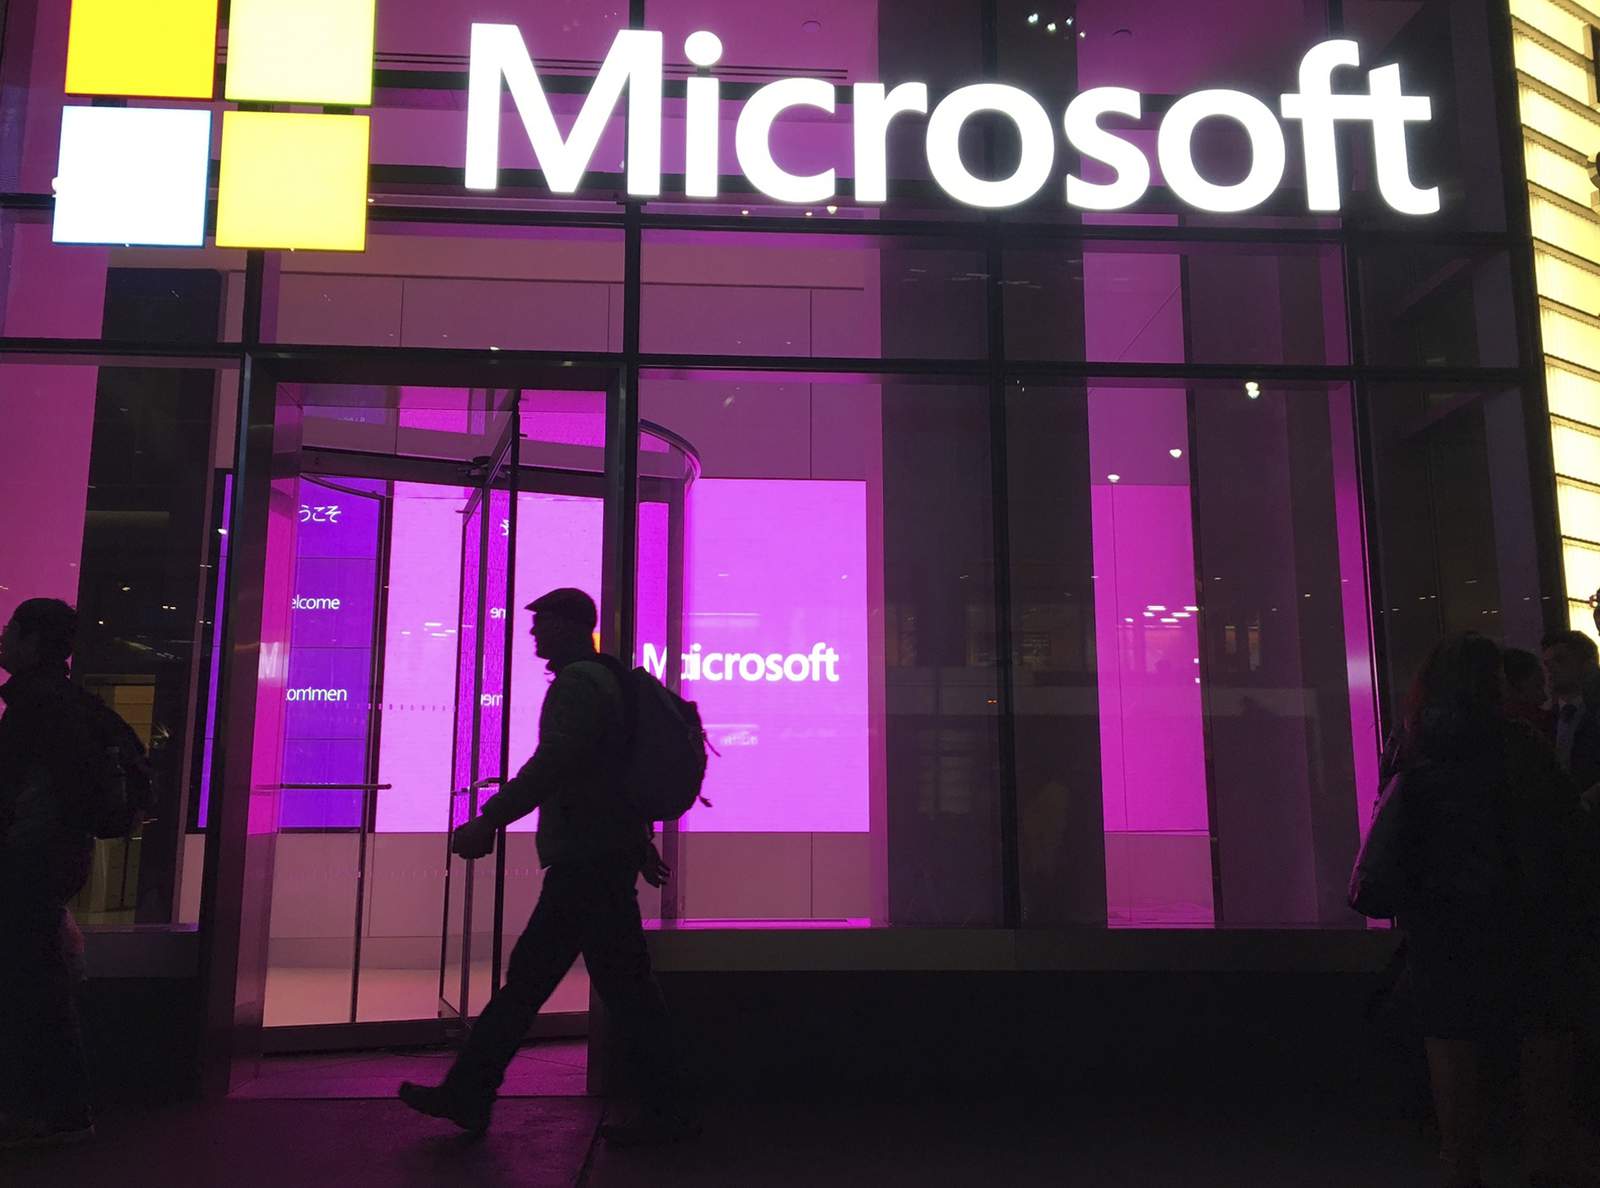 Microsoft buying speech recognition firm Nuance in $16B deal